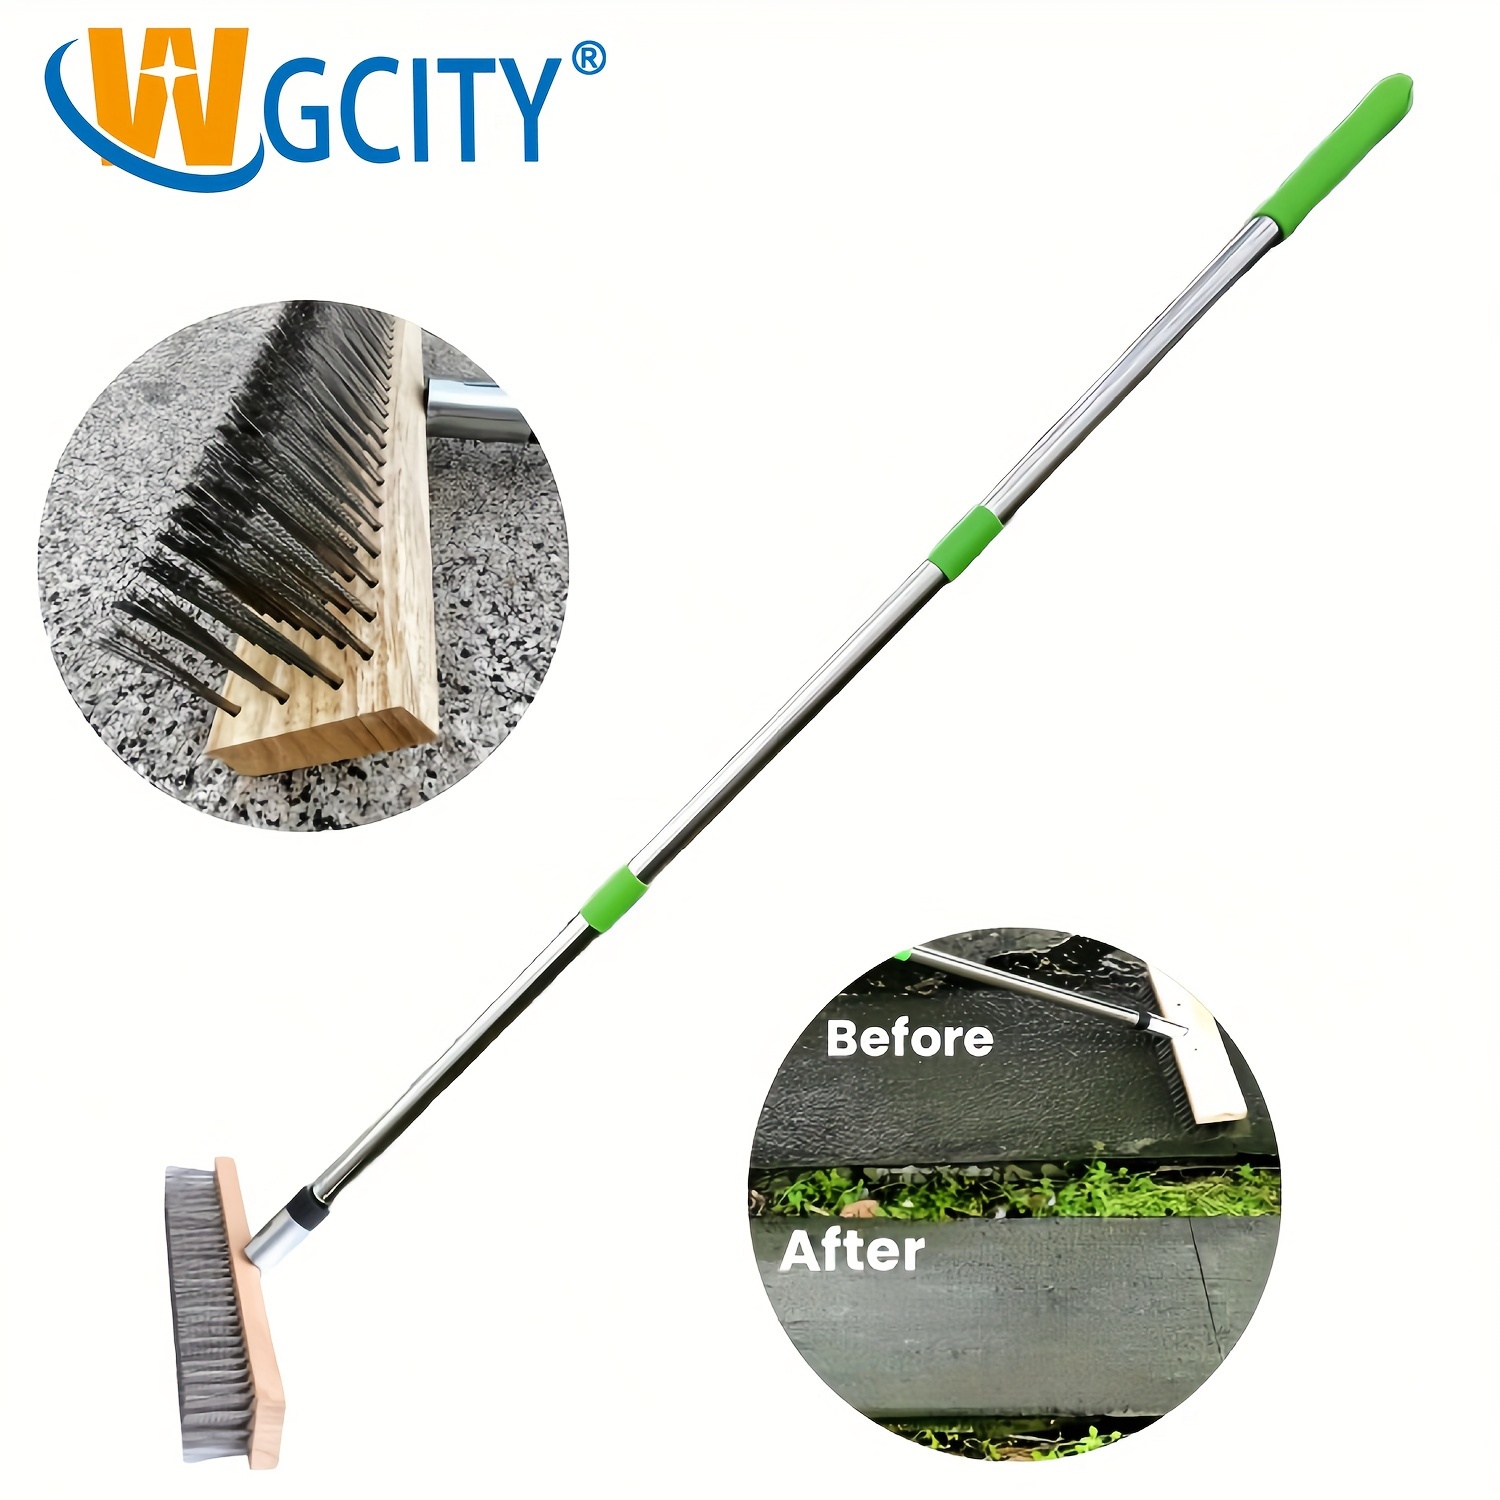 

Gcity Long Handle Pool Brush With Stainless Steel Wire Bristles, Hard Firmness Deck Scrub Brush With Removable Handle For Outdoor Cement Floor Cleaning